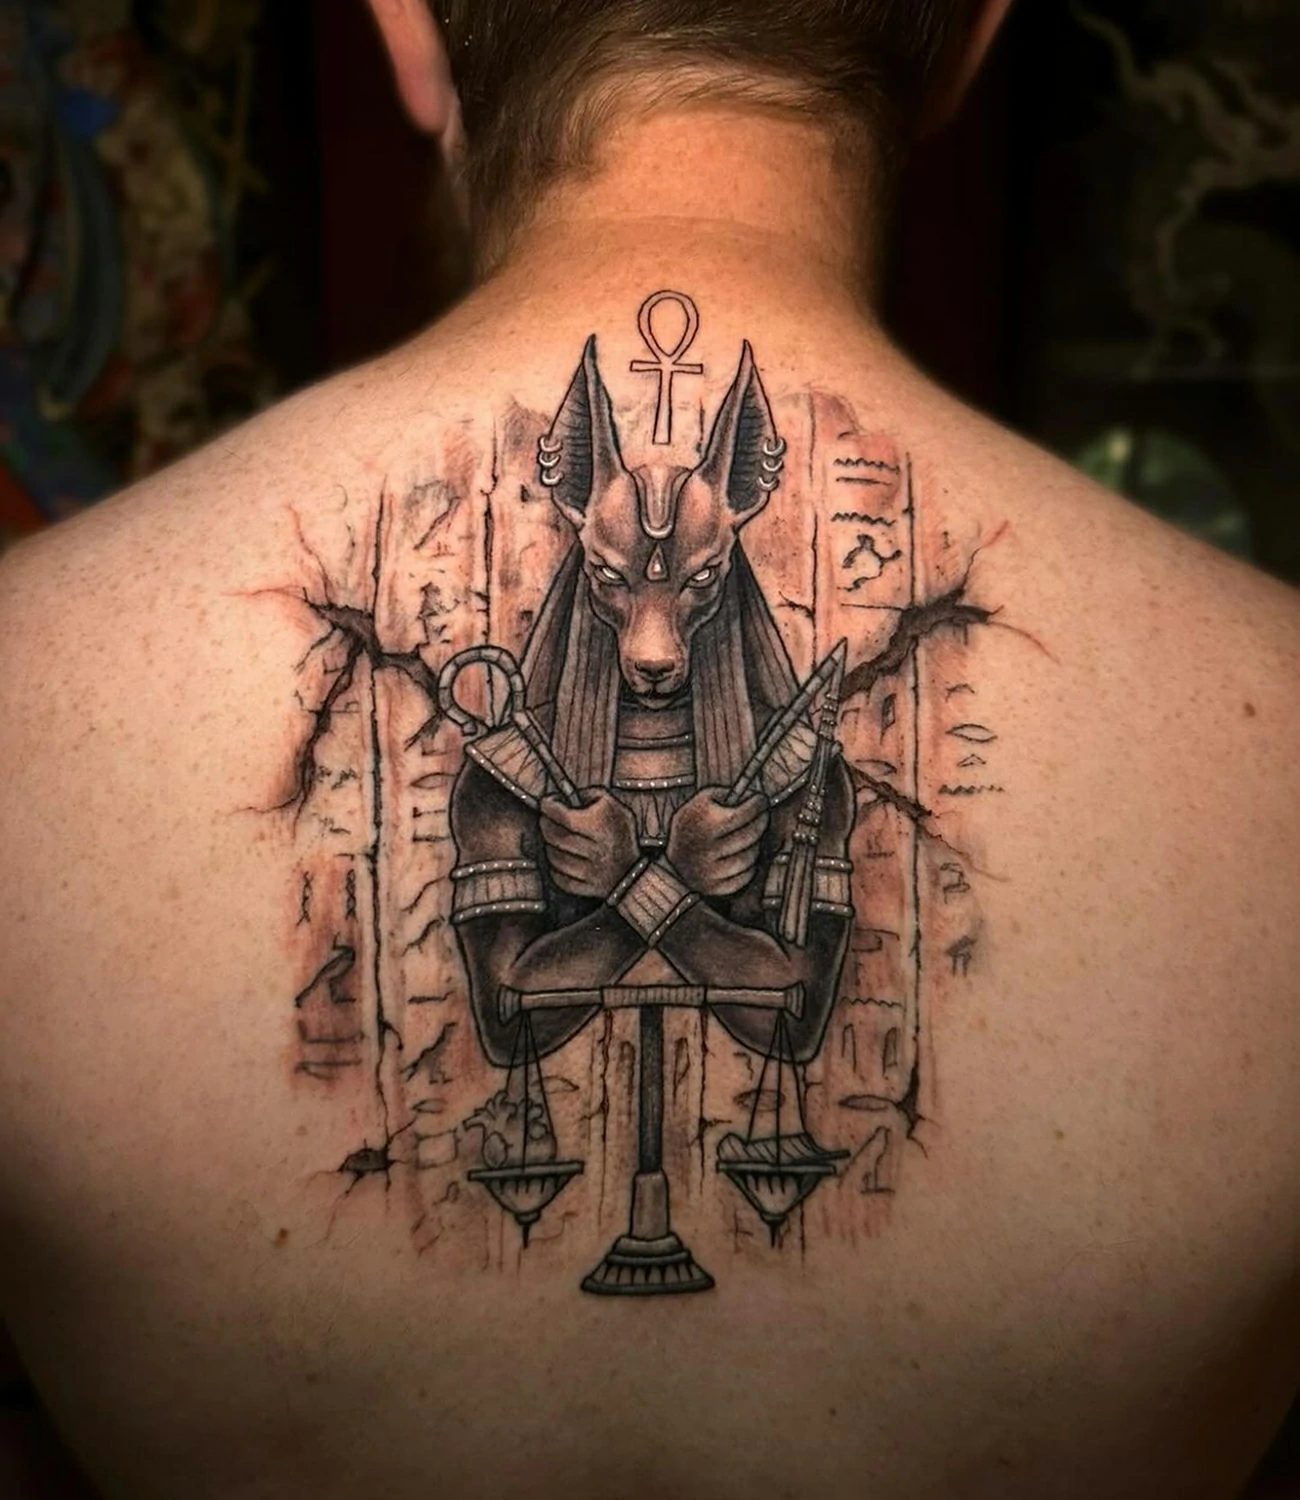 Anubis Scales of Justice Tattoo